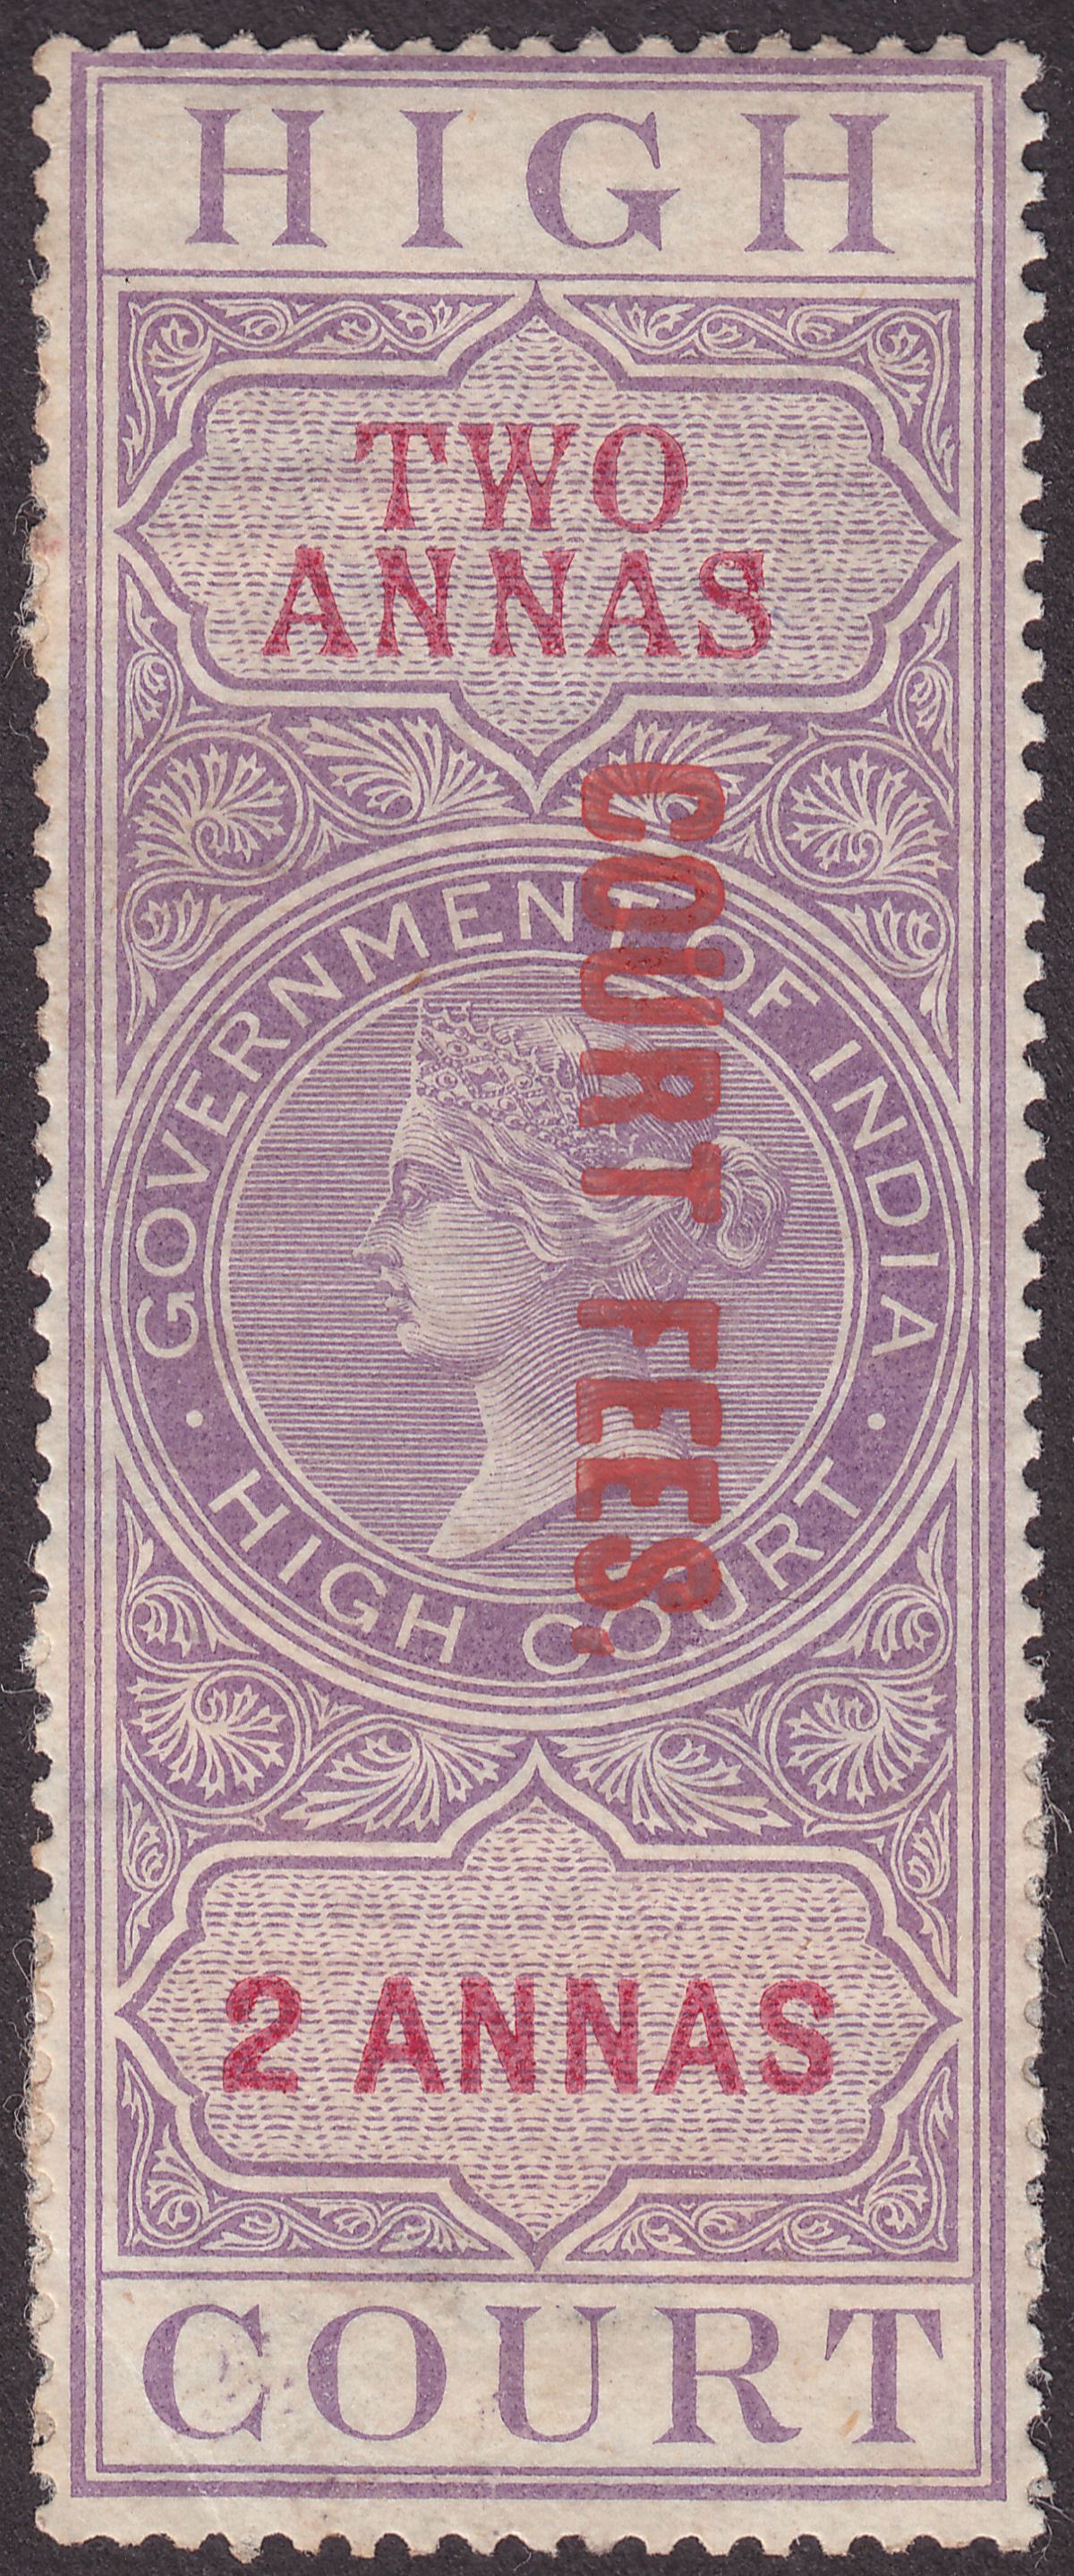 India 1870 QV Revenue Court Fees Overprint High Court 2a Lilac + Red Used BF69